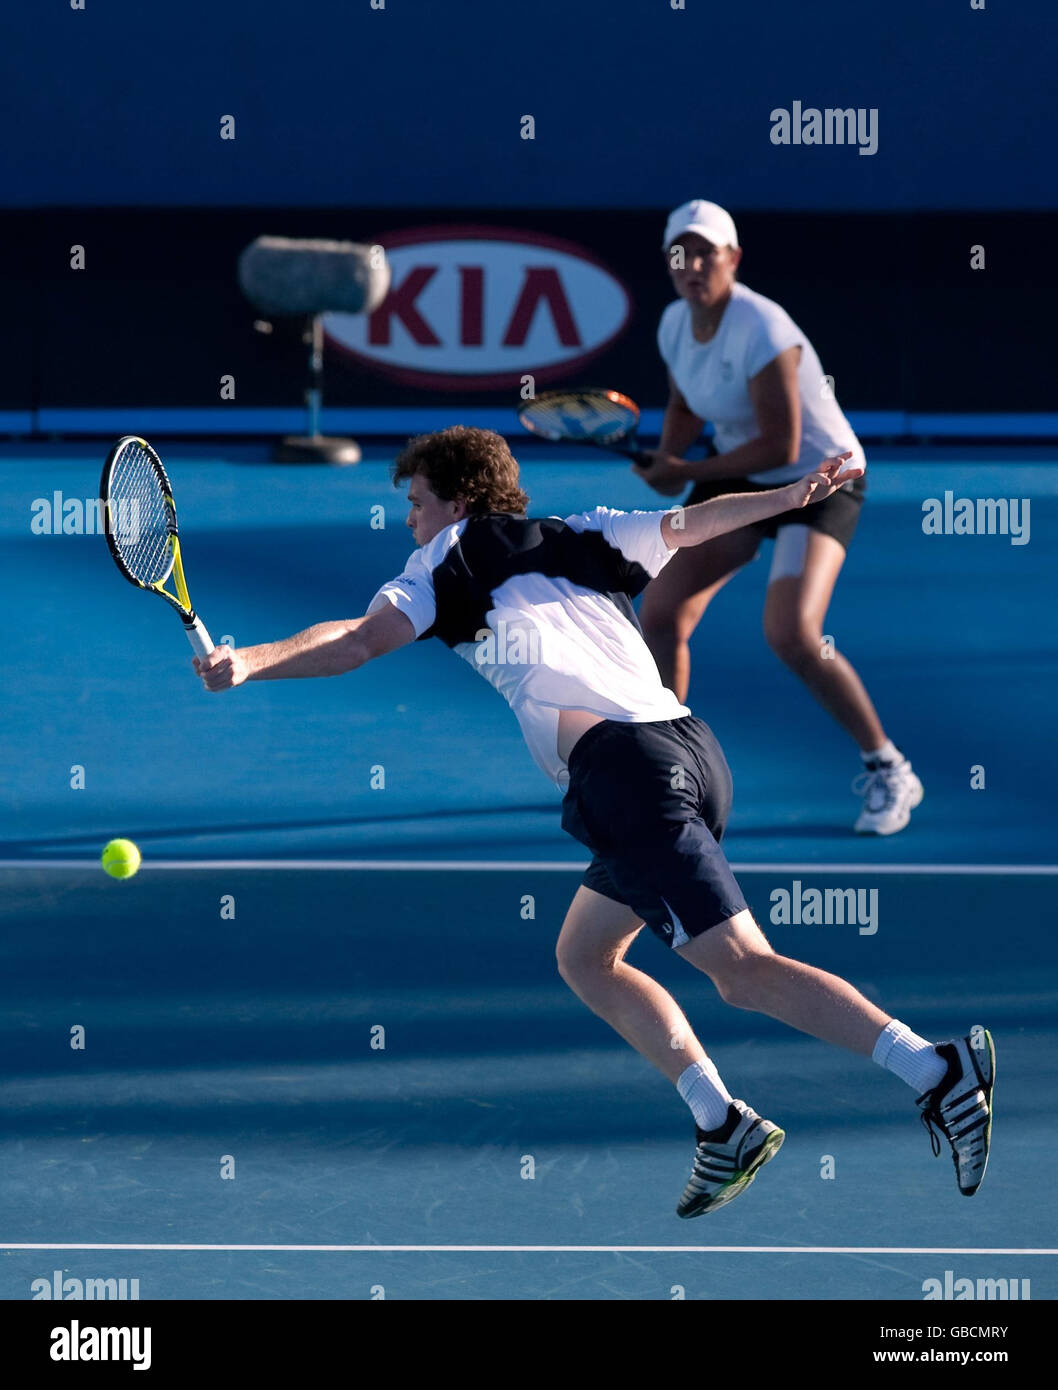 Great Britain's Jamie Murray in action with doubles partner Liezel Huber (behind) as they play Nathalie Dechy and Andy Ram during the Australian Open 2009 at Melbourne Park, Melbourne, Australia. Stock Photo